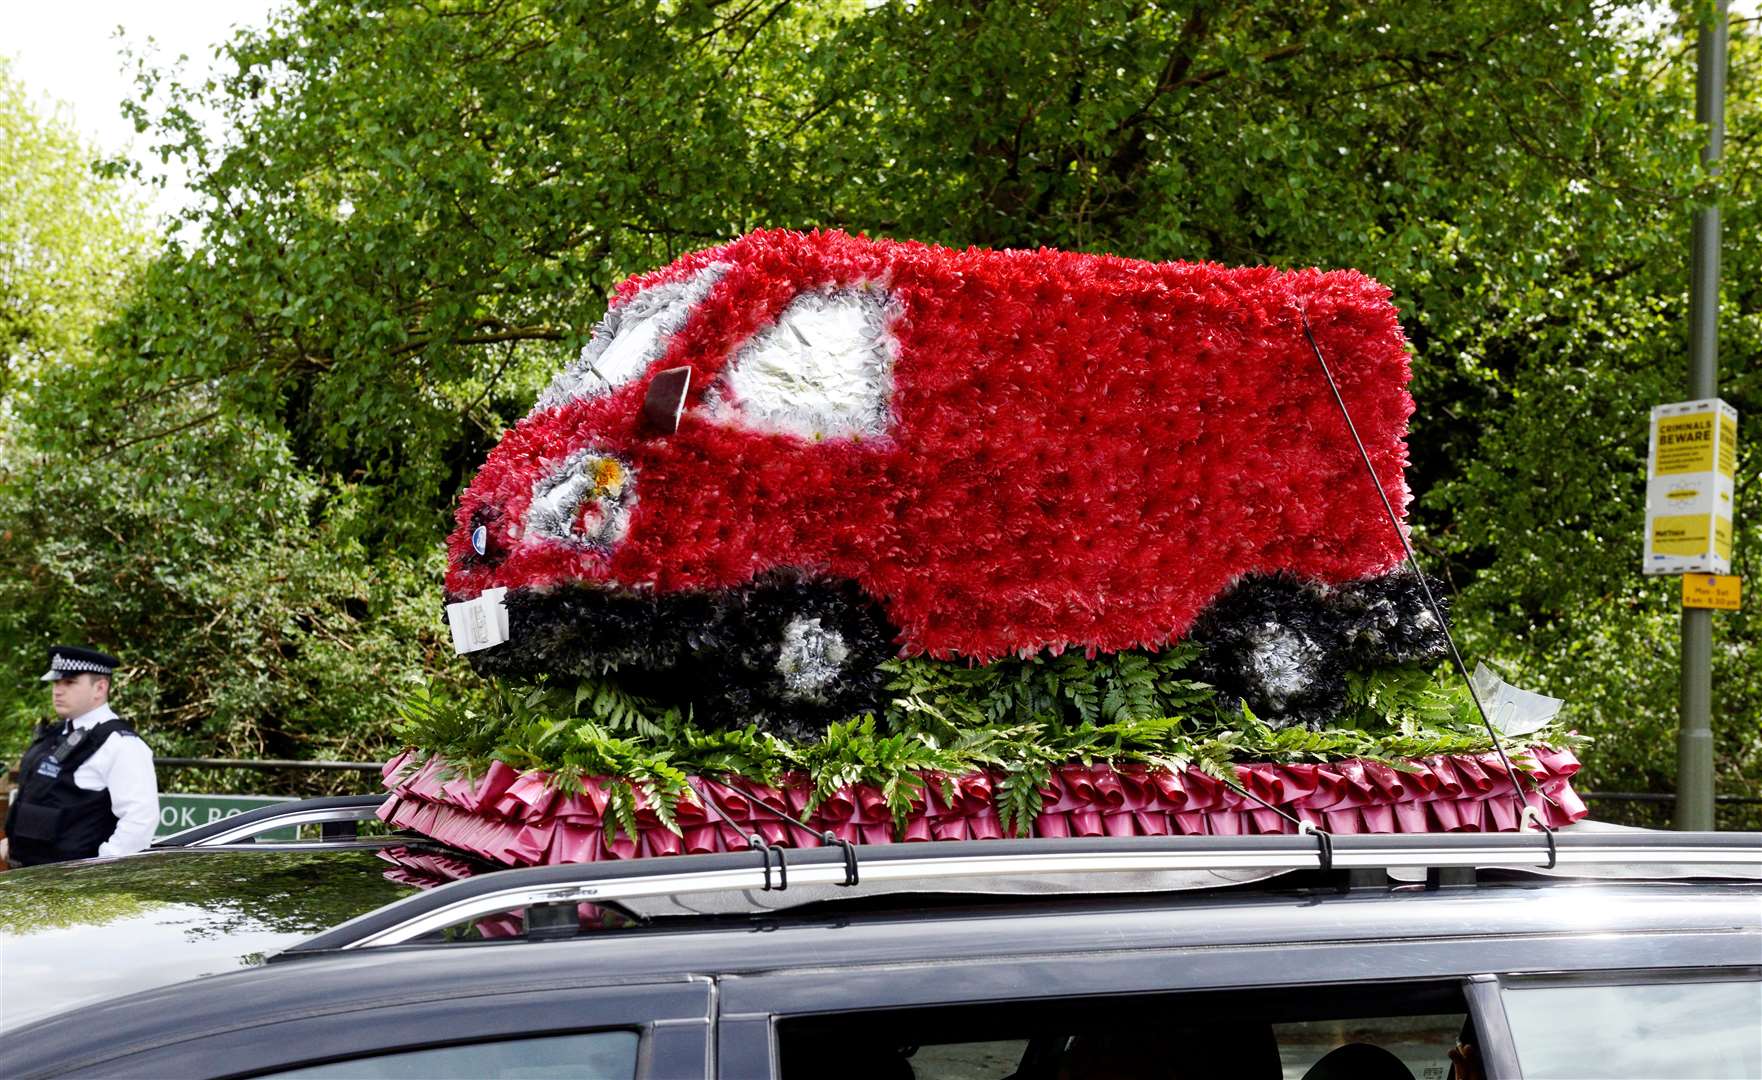 Some of the flowers included a van and a boxing ring. Picture: SWNS